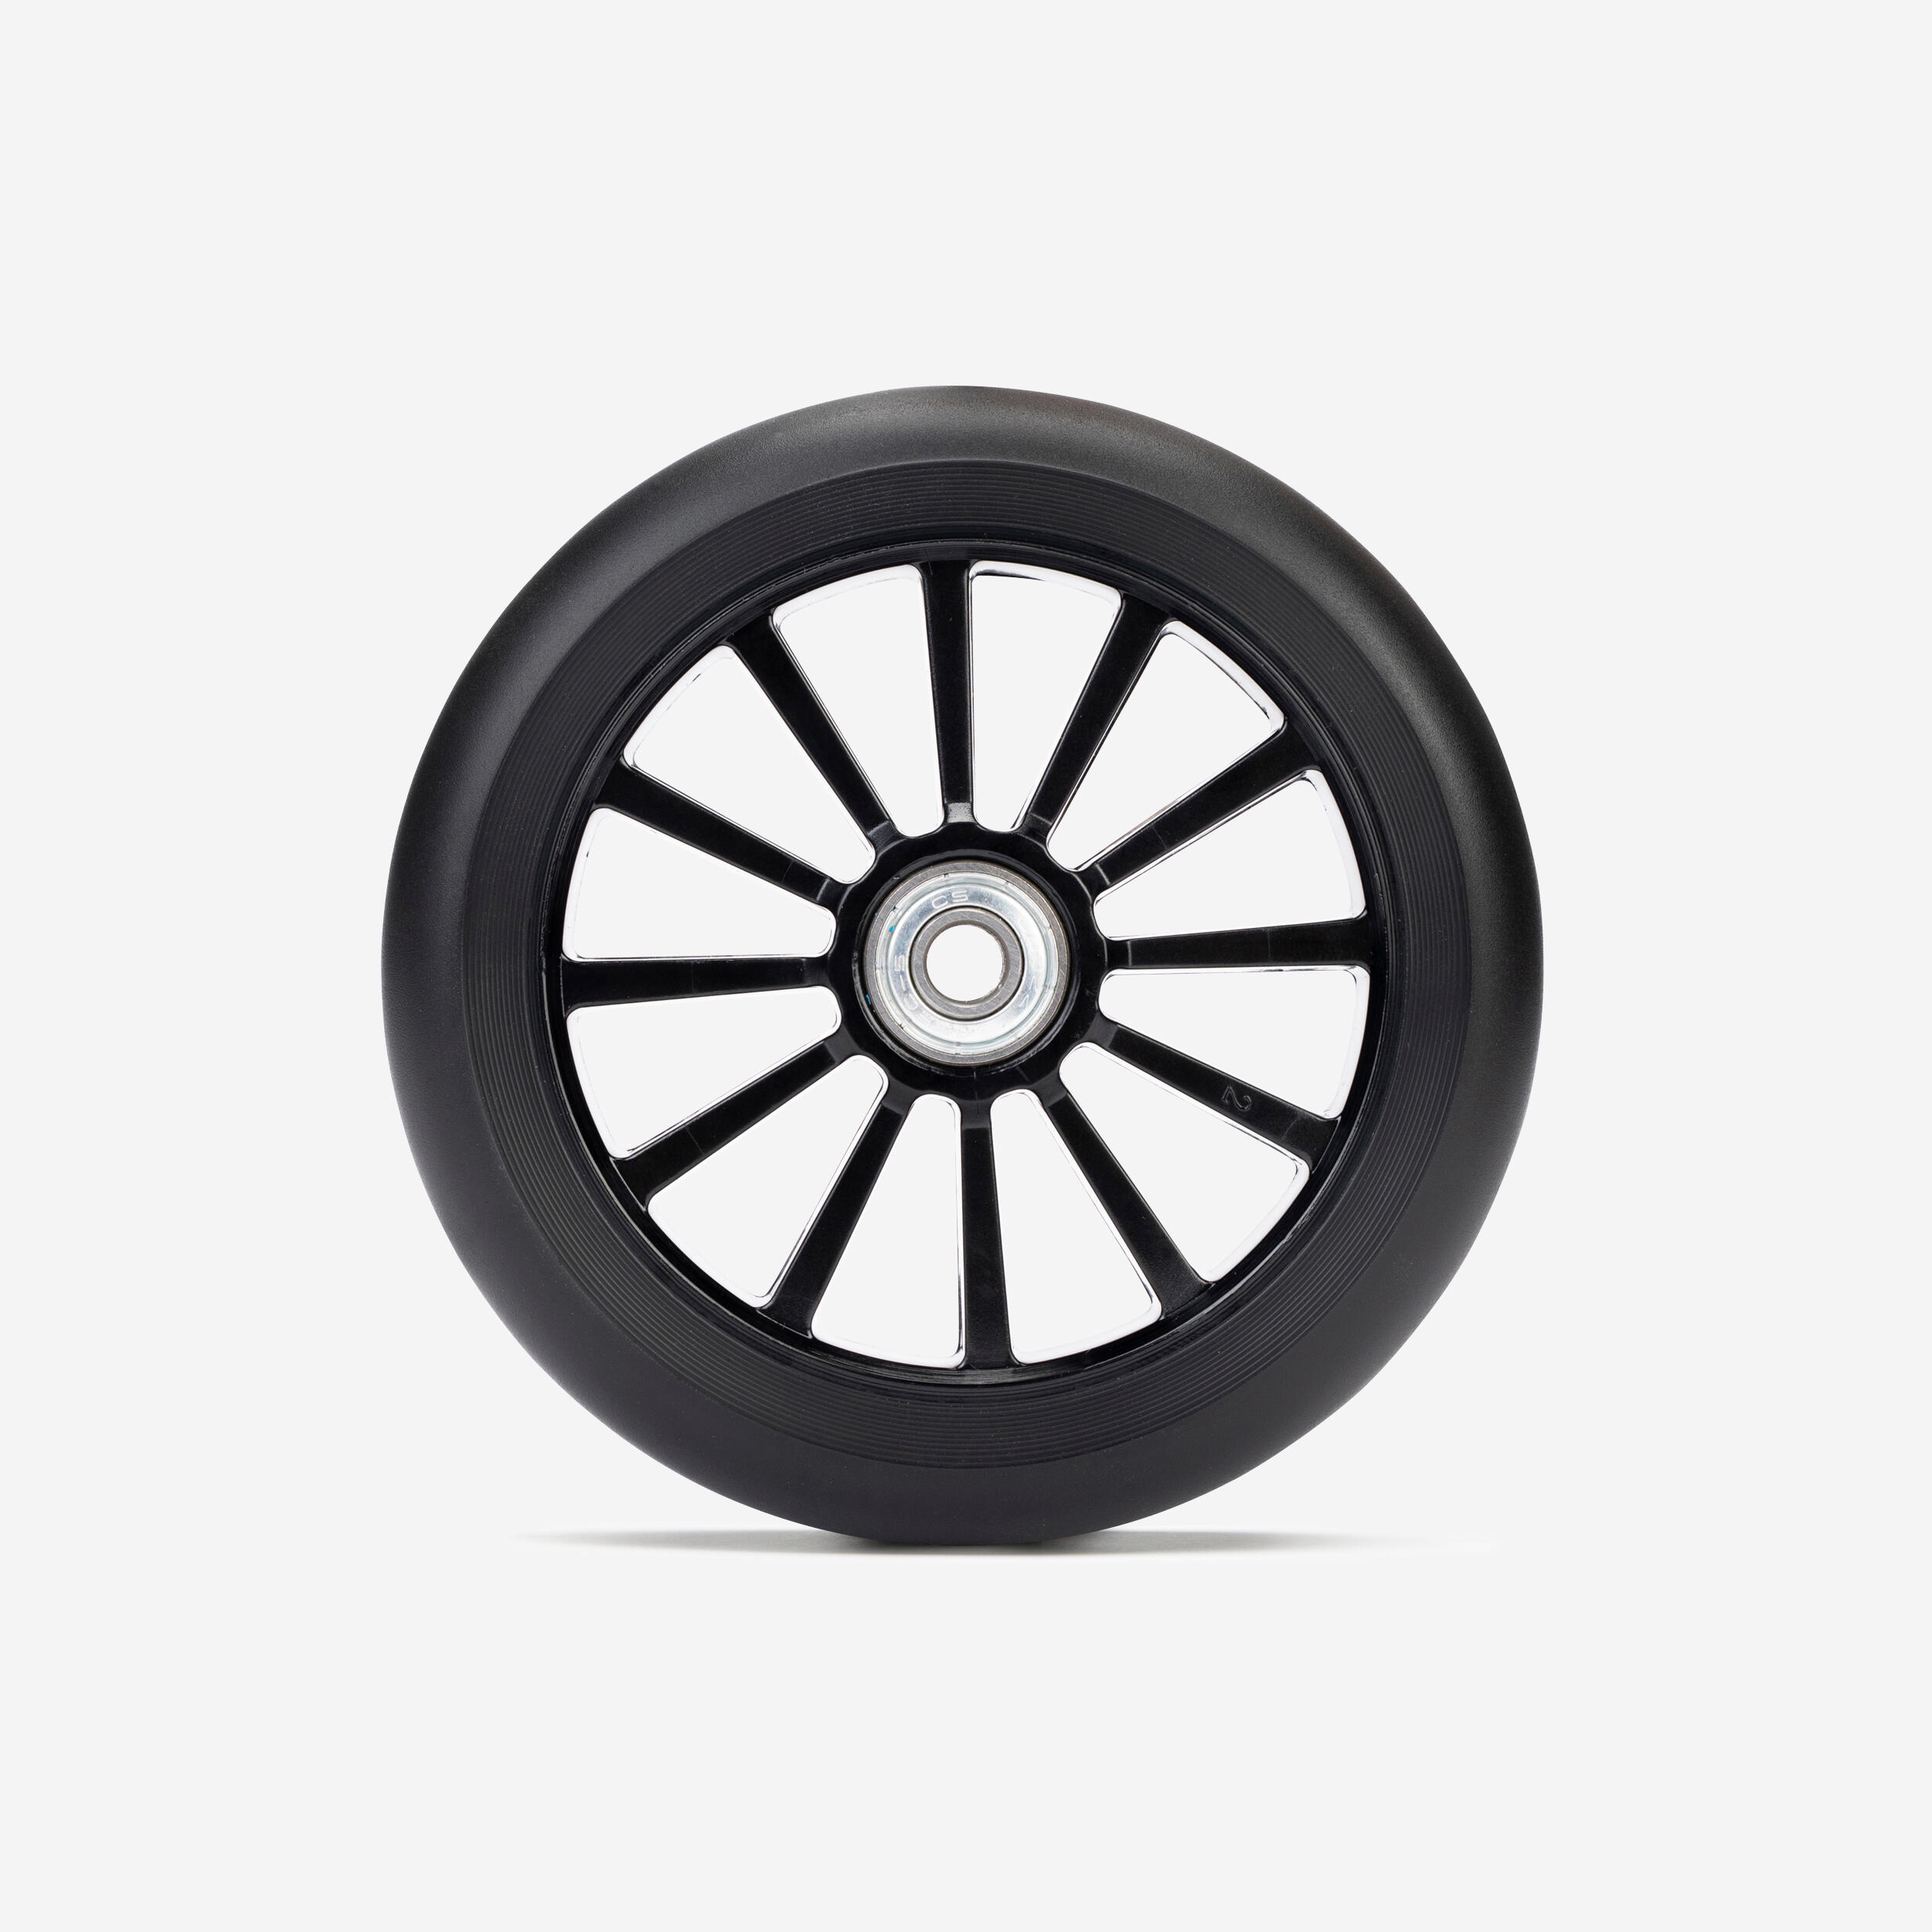 OXELO 1 Wheel + Bearing for MID 1, MID 3, MID 5, PLAY 3 and PLAY 5 (front) Scooters